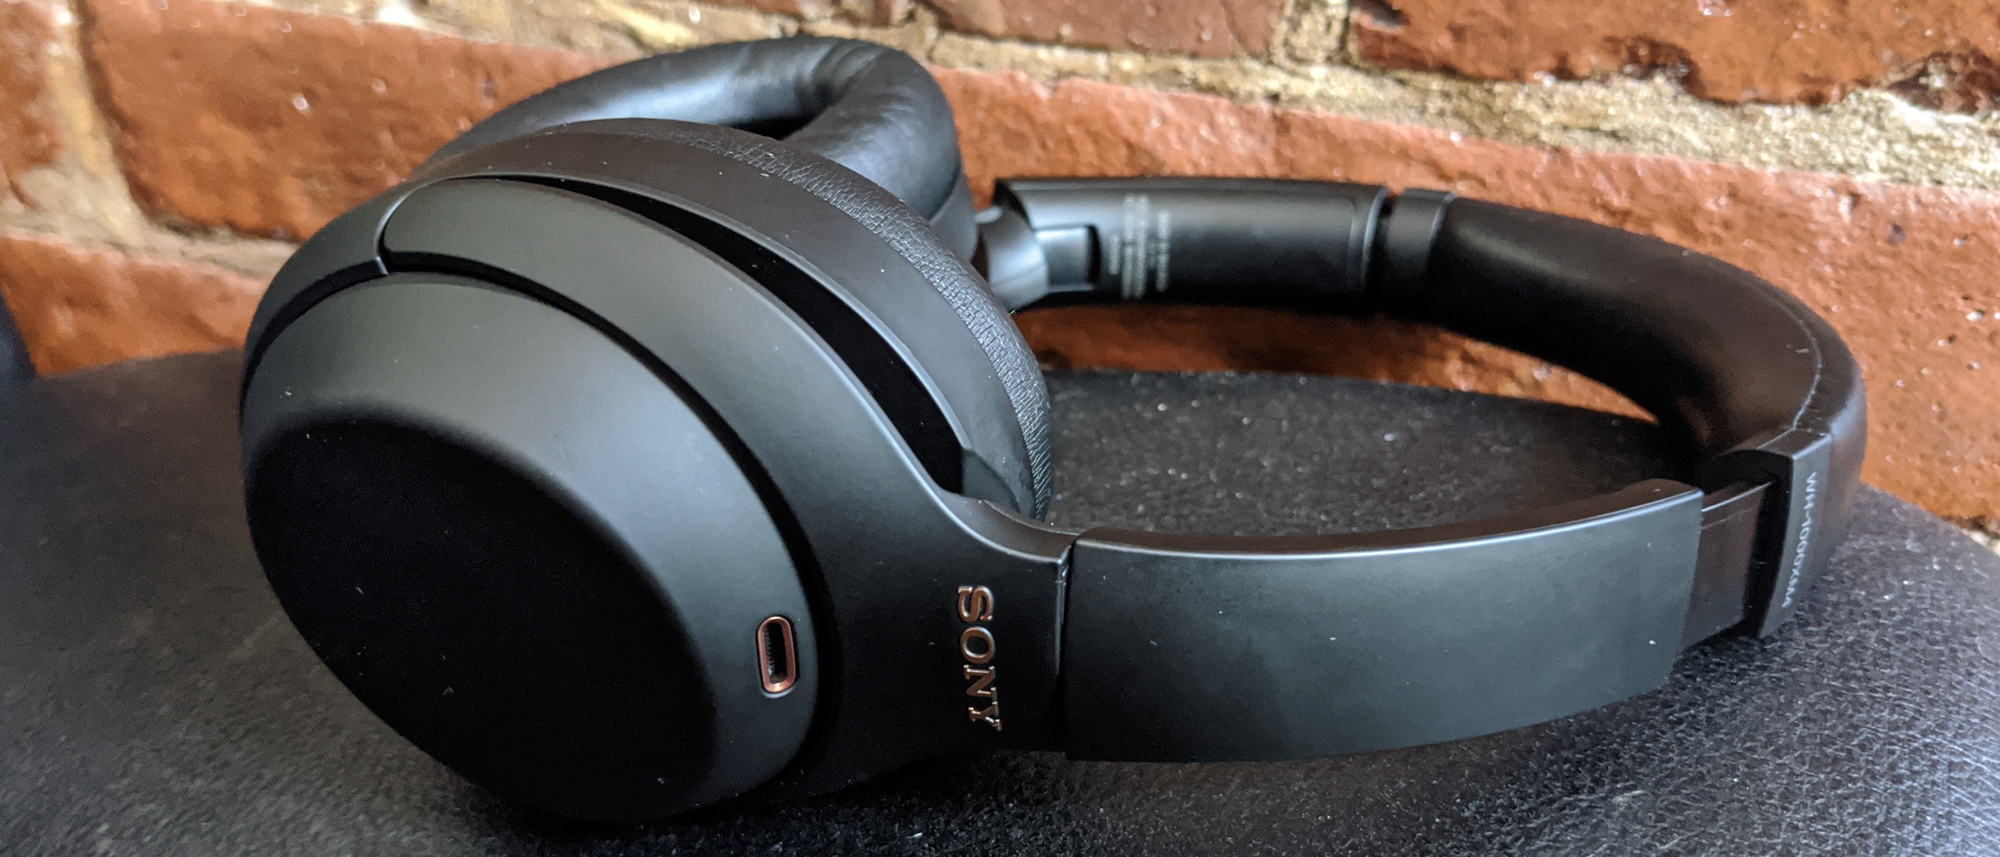 Sony WH-1000XM4 review | Laptop Mag